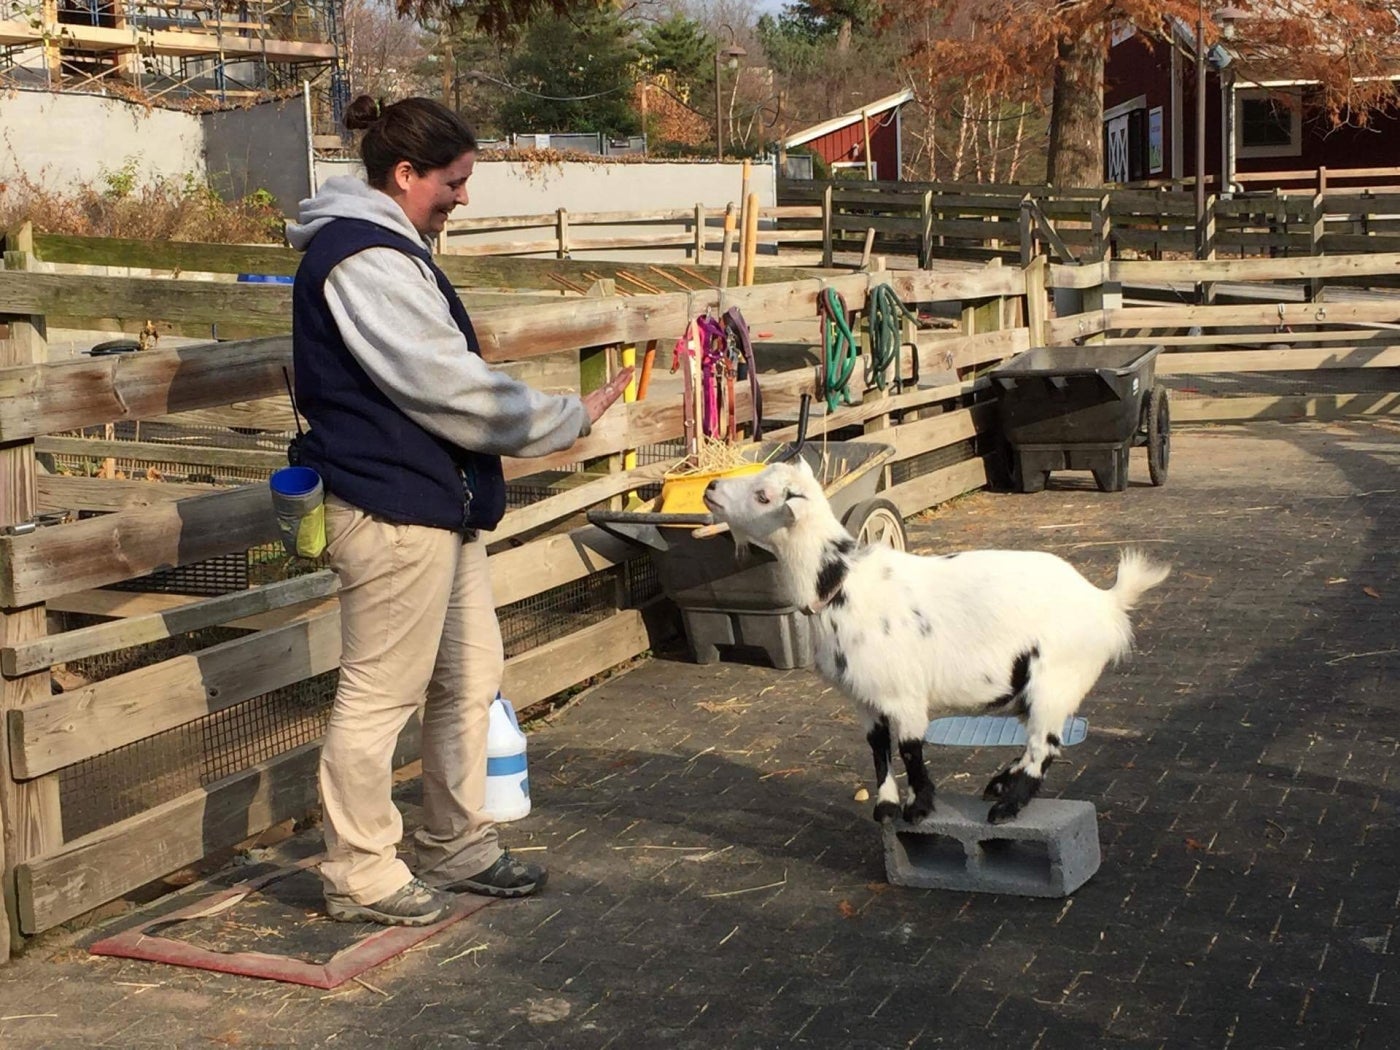 Animal keeper Nikki Maticic stands in front of a small goat and directs the goat, using a hand signal, to stand on a cinder block and remain stationed there.